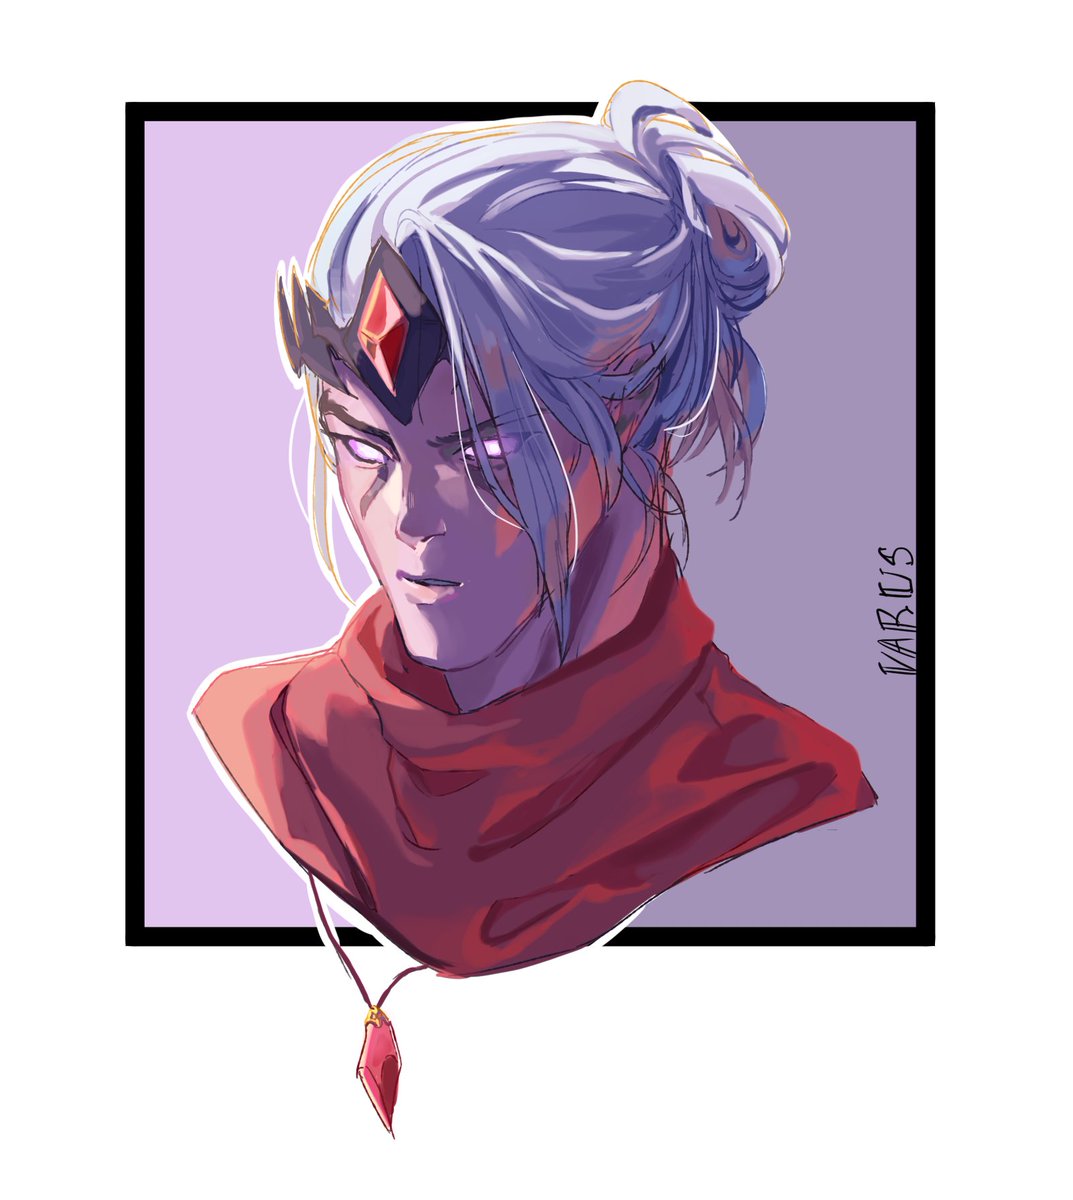 Varus with a messy bun and some Shen and Zed sketches I did for that last drawing, because I want to be productive but have no creativity lol

#Varus #shen #zed #ArtofLegends 